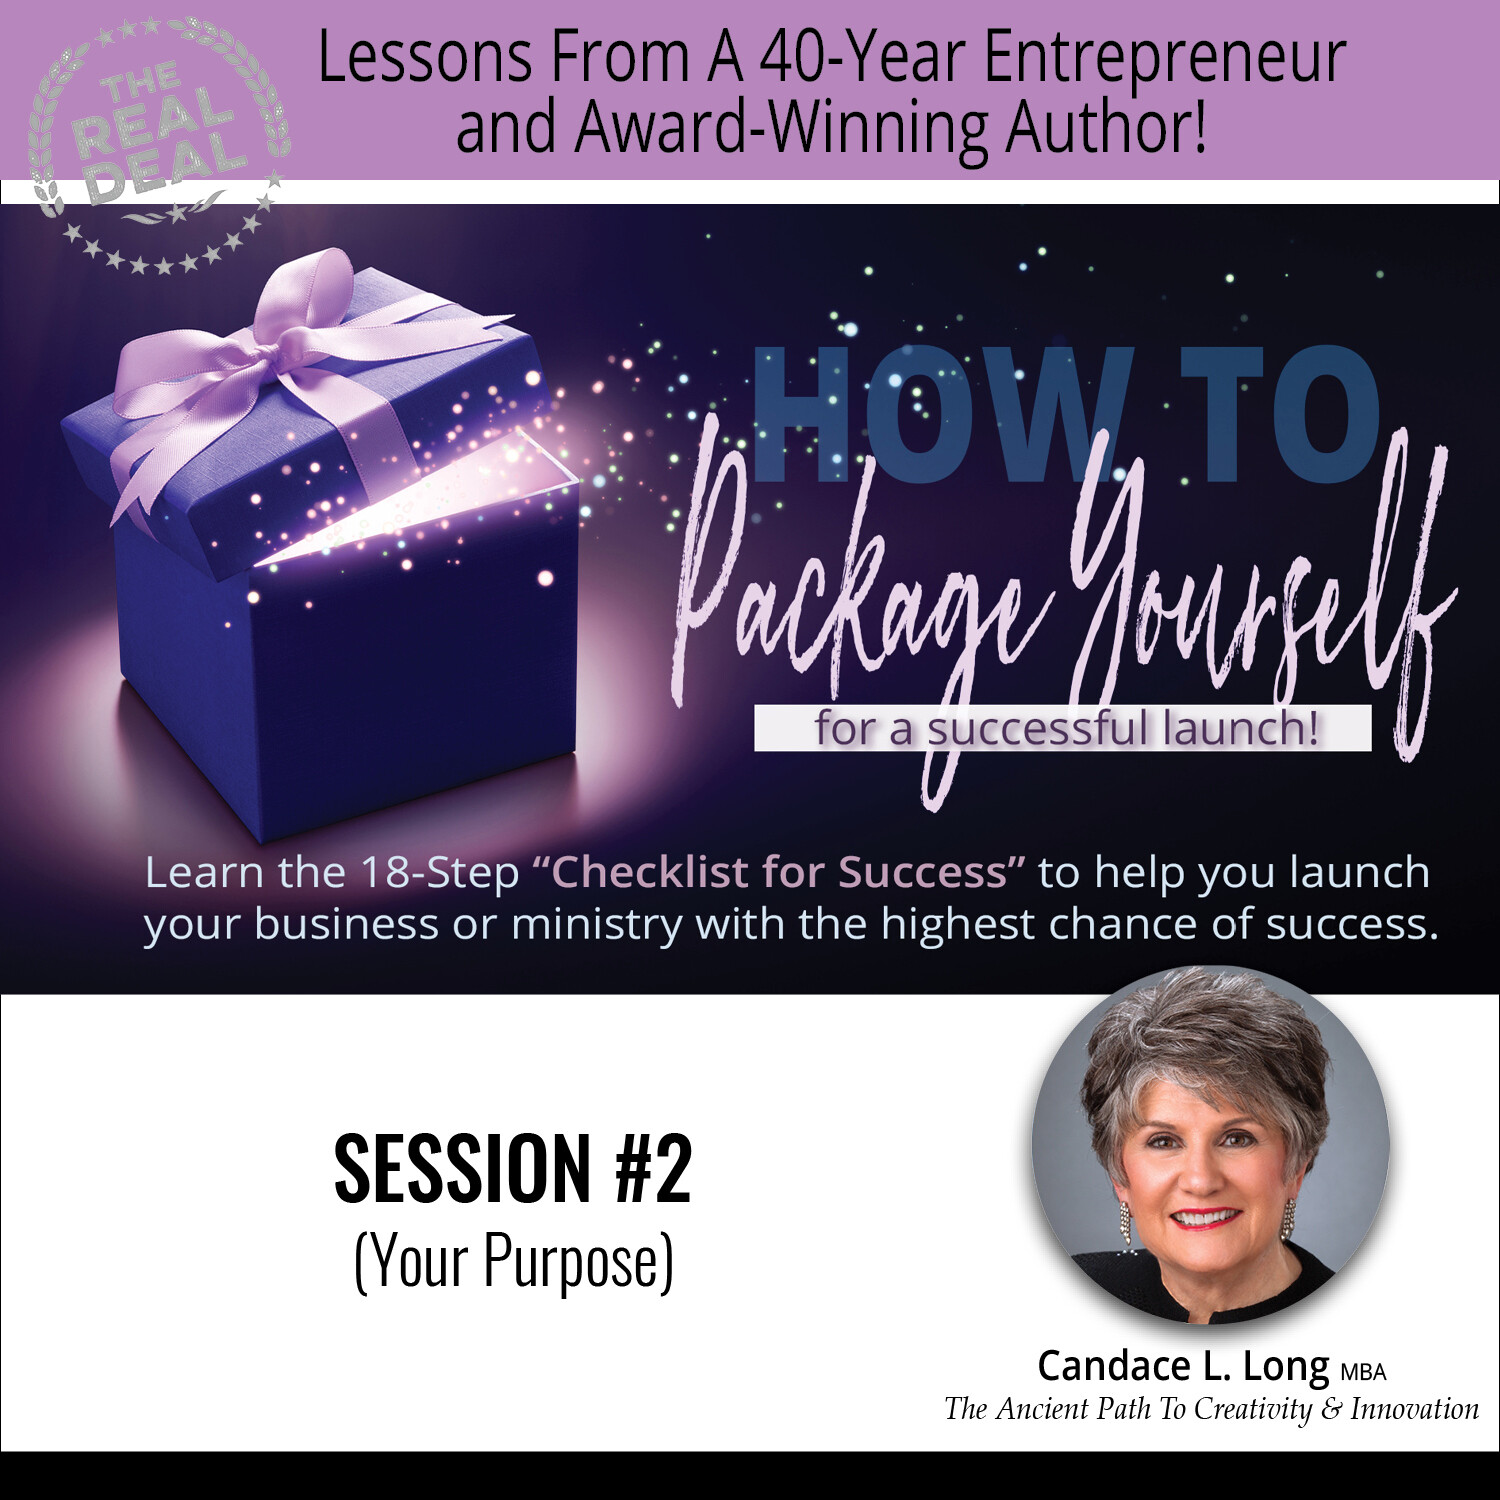 Session #2:  Your Purpose